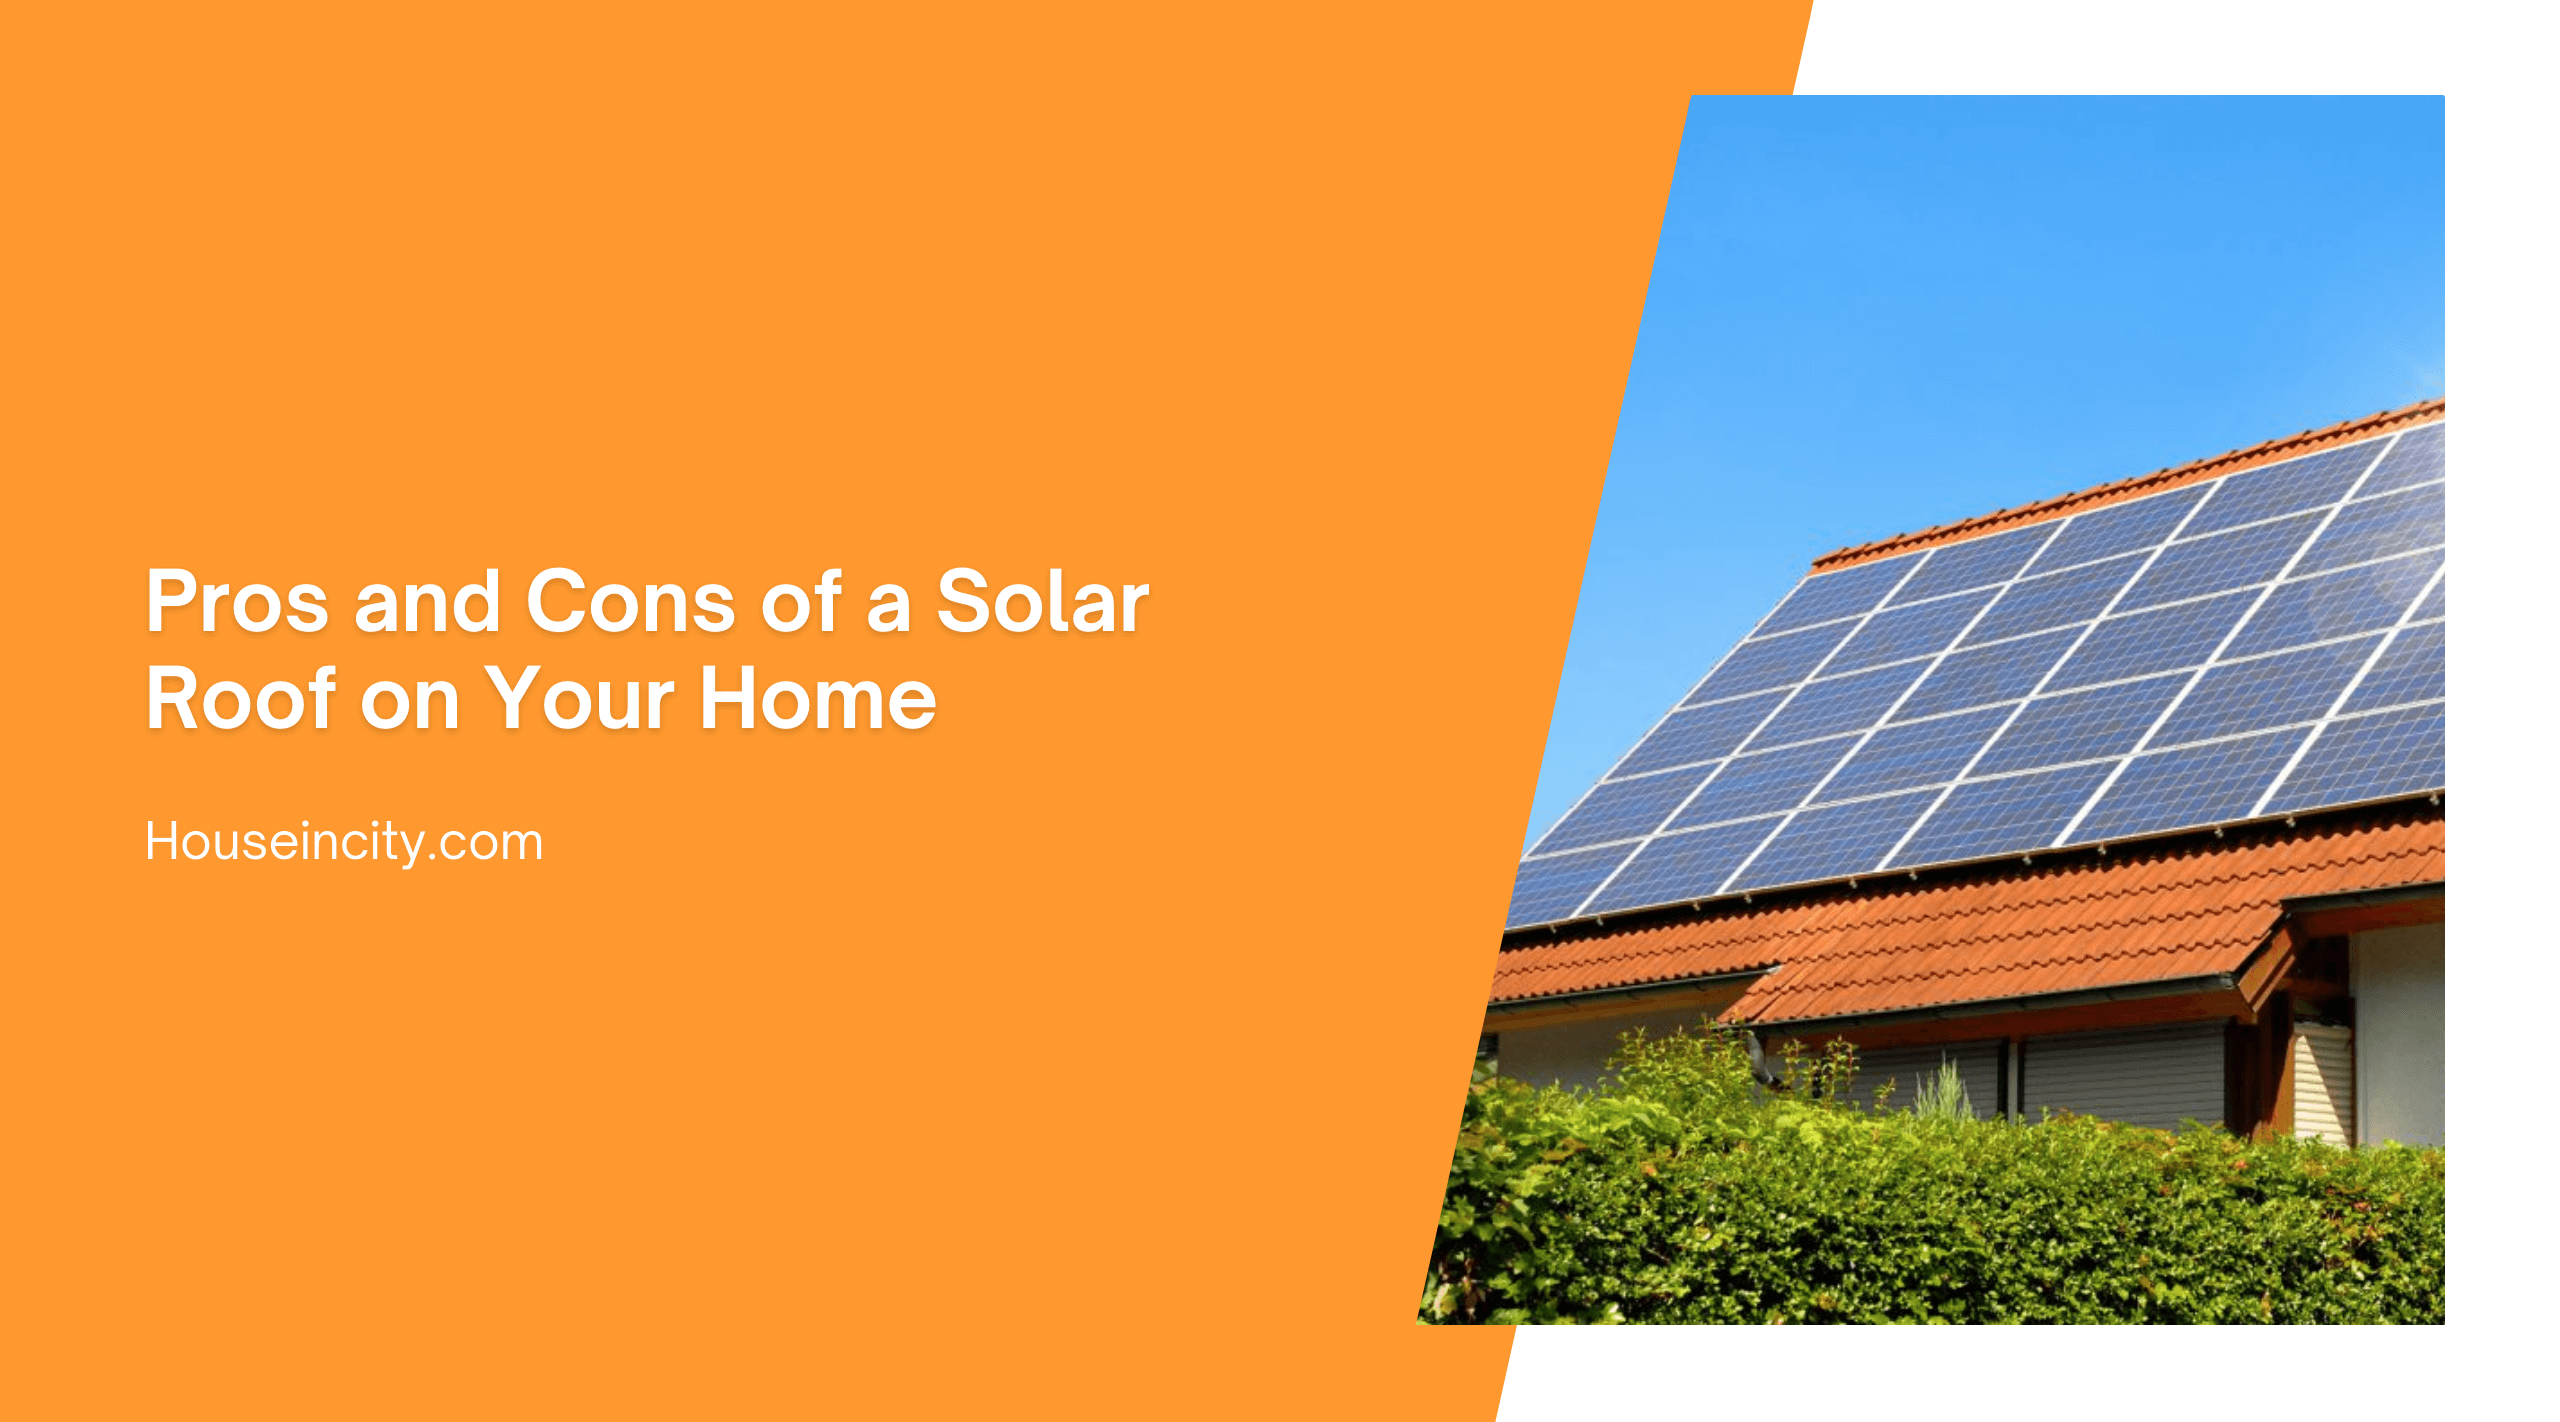 Pros and Cons of a Solar Roof on Your Home